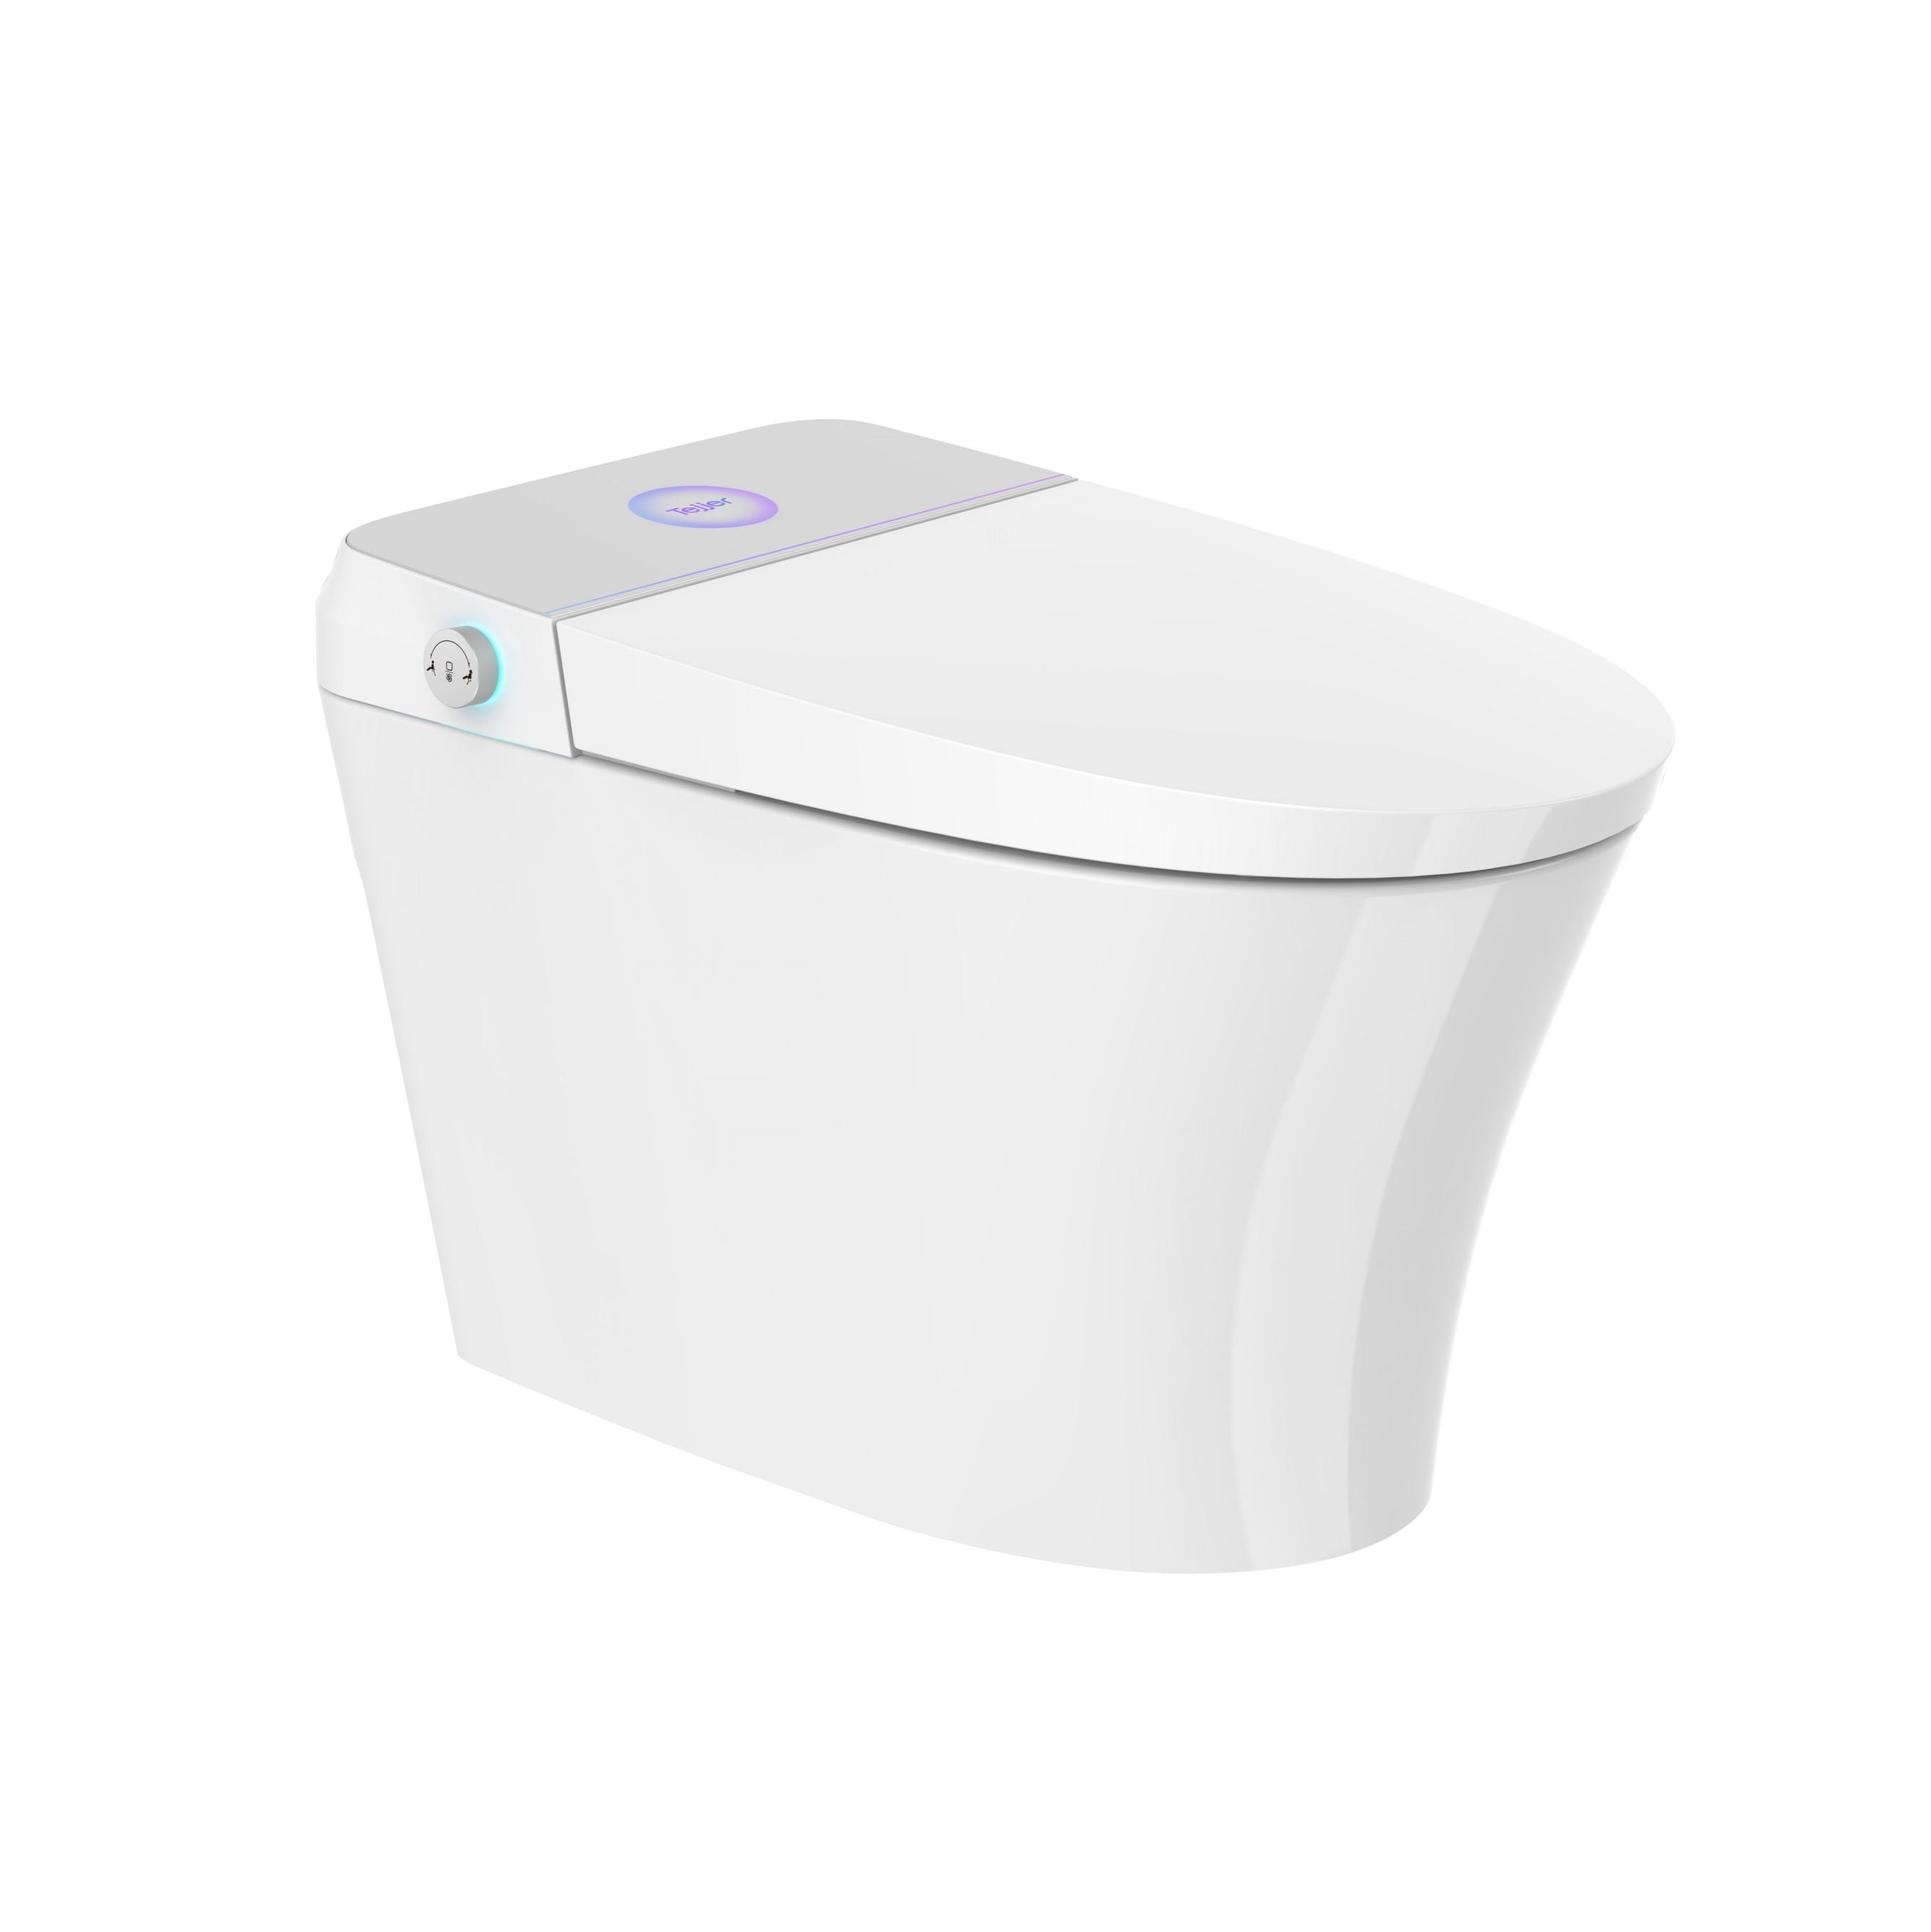 Elongated Smart Toilet Bidet in White with UV-A Sterilization, Auto Flush, Heated Seat and Remote